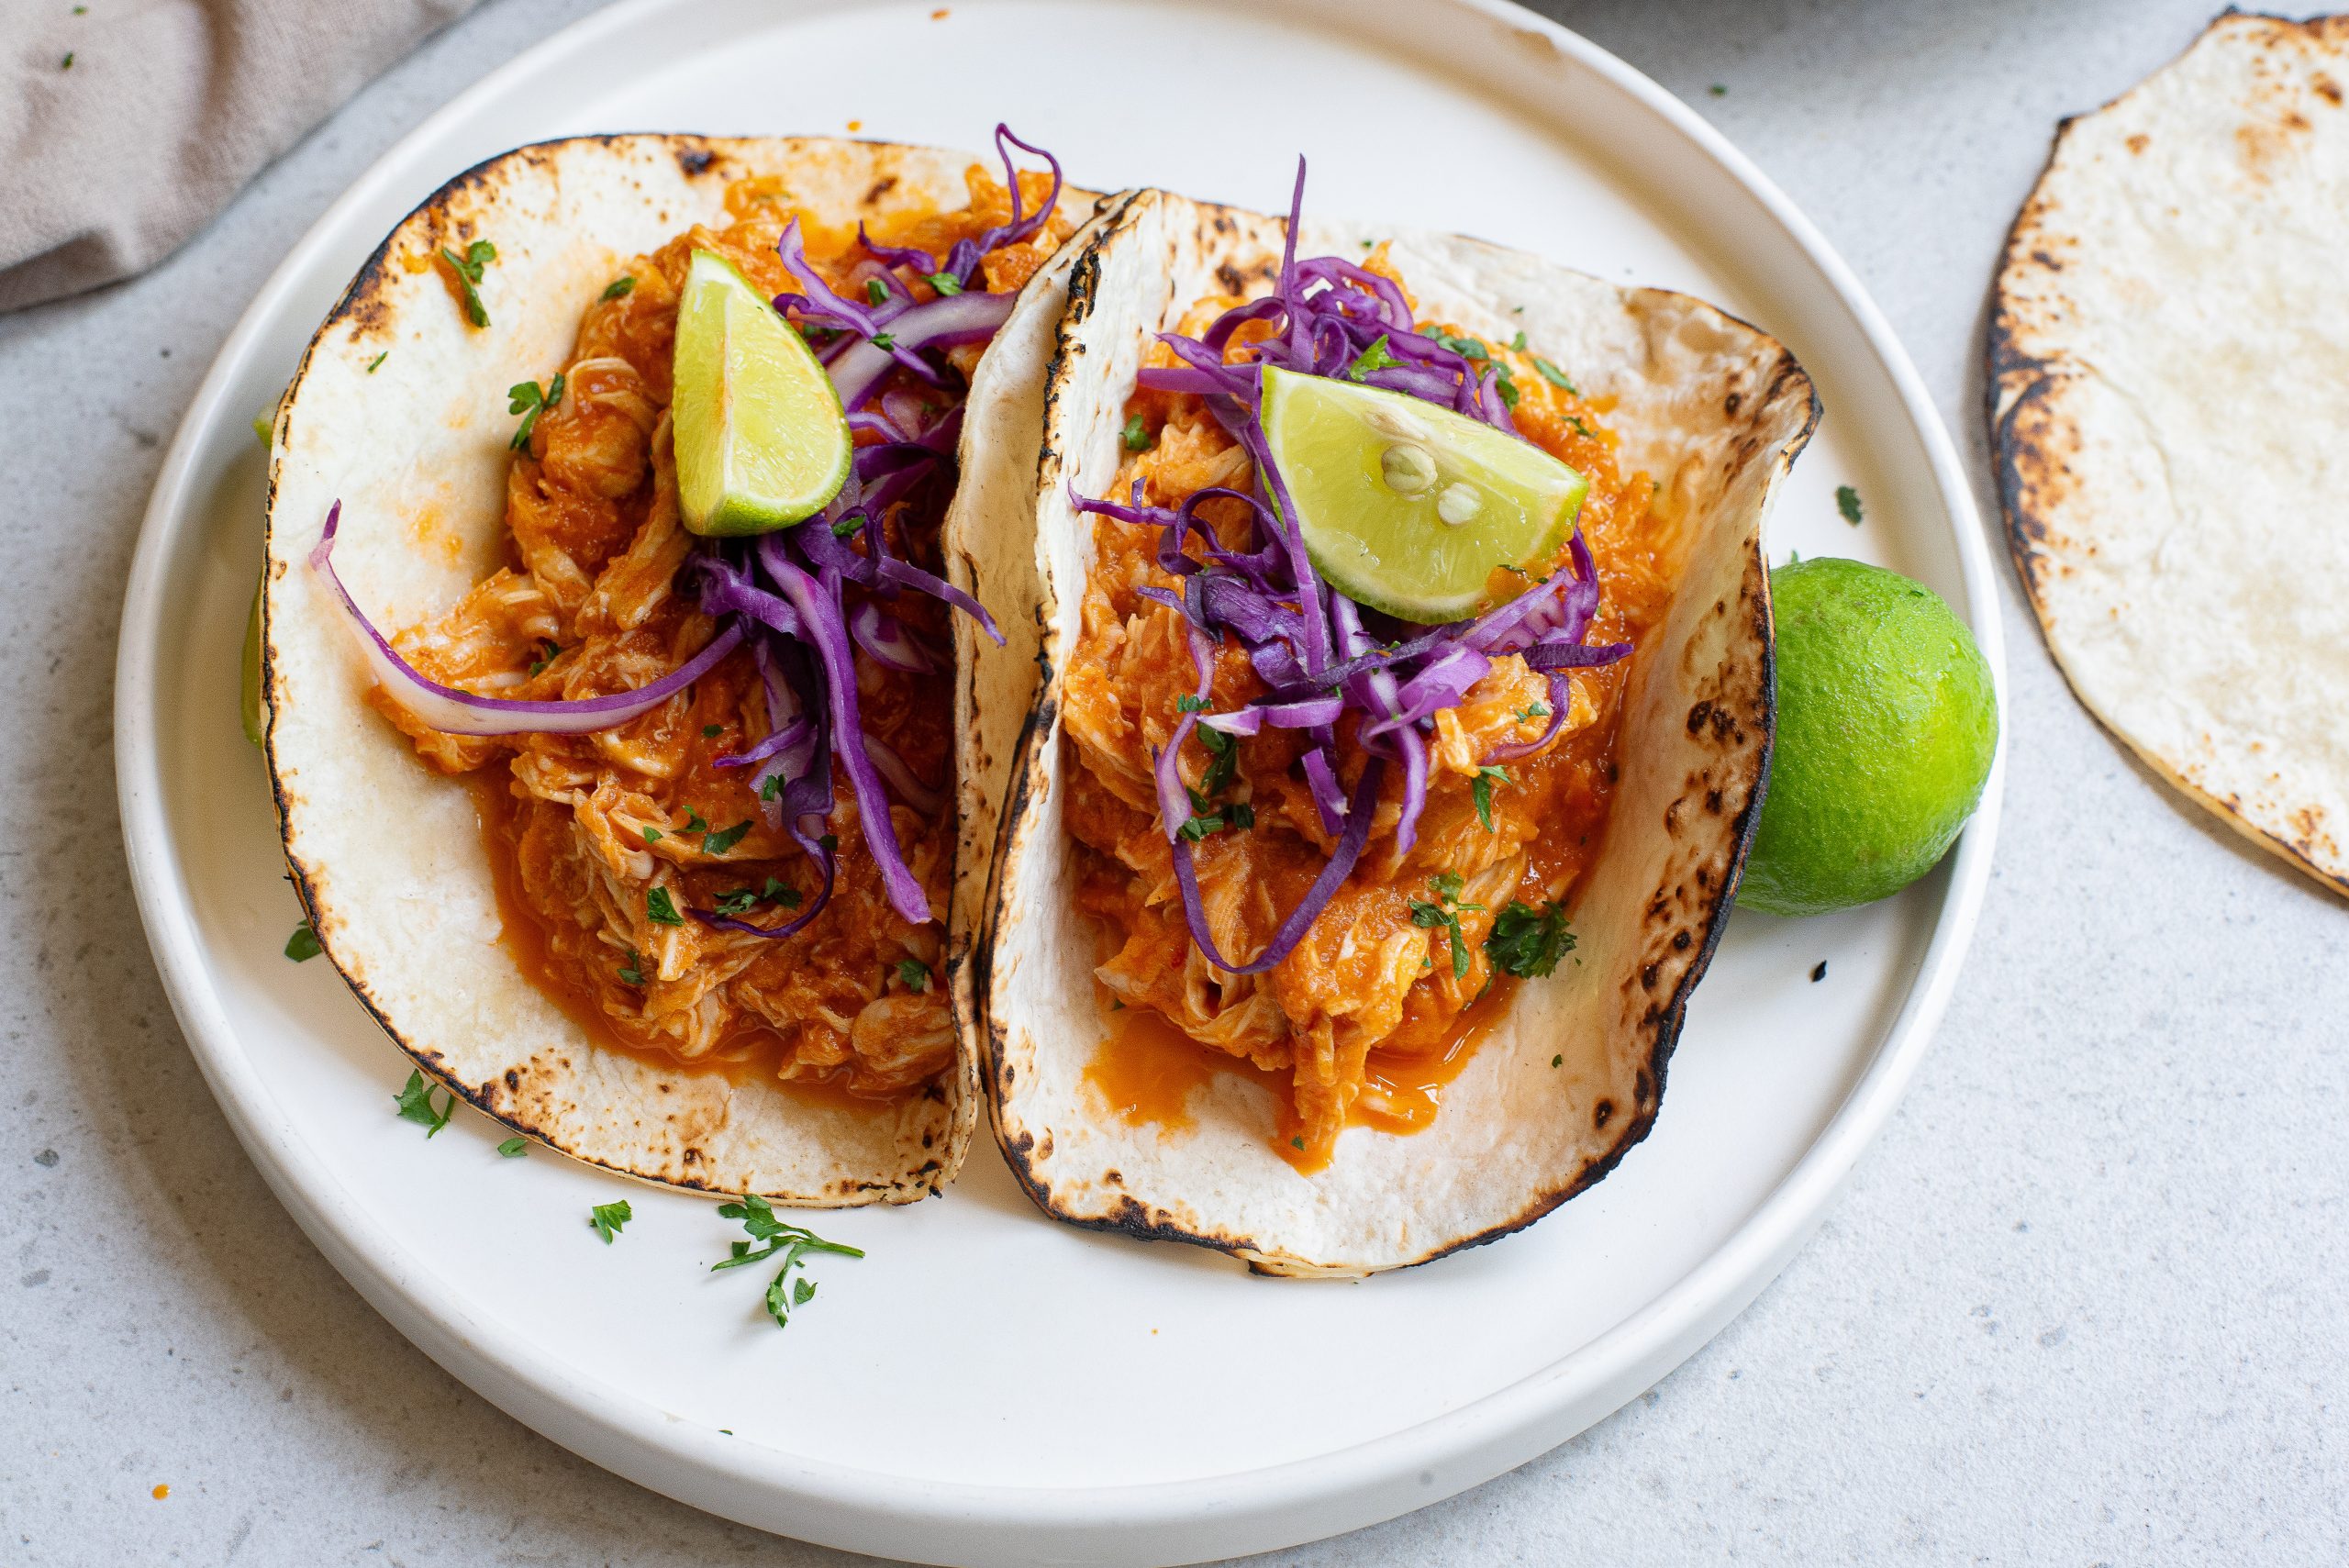 Two Chicken Tinga tacos on a plate with slaw and limes.